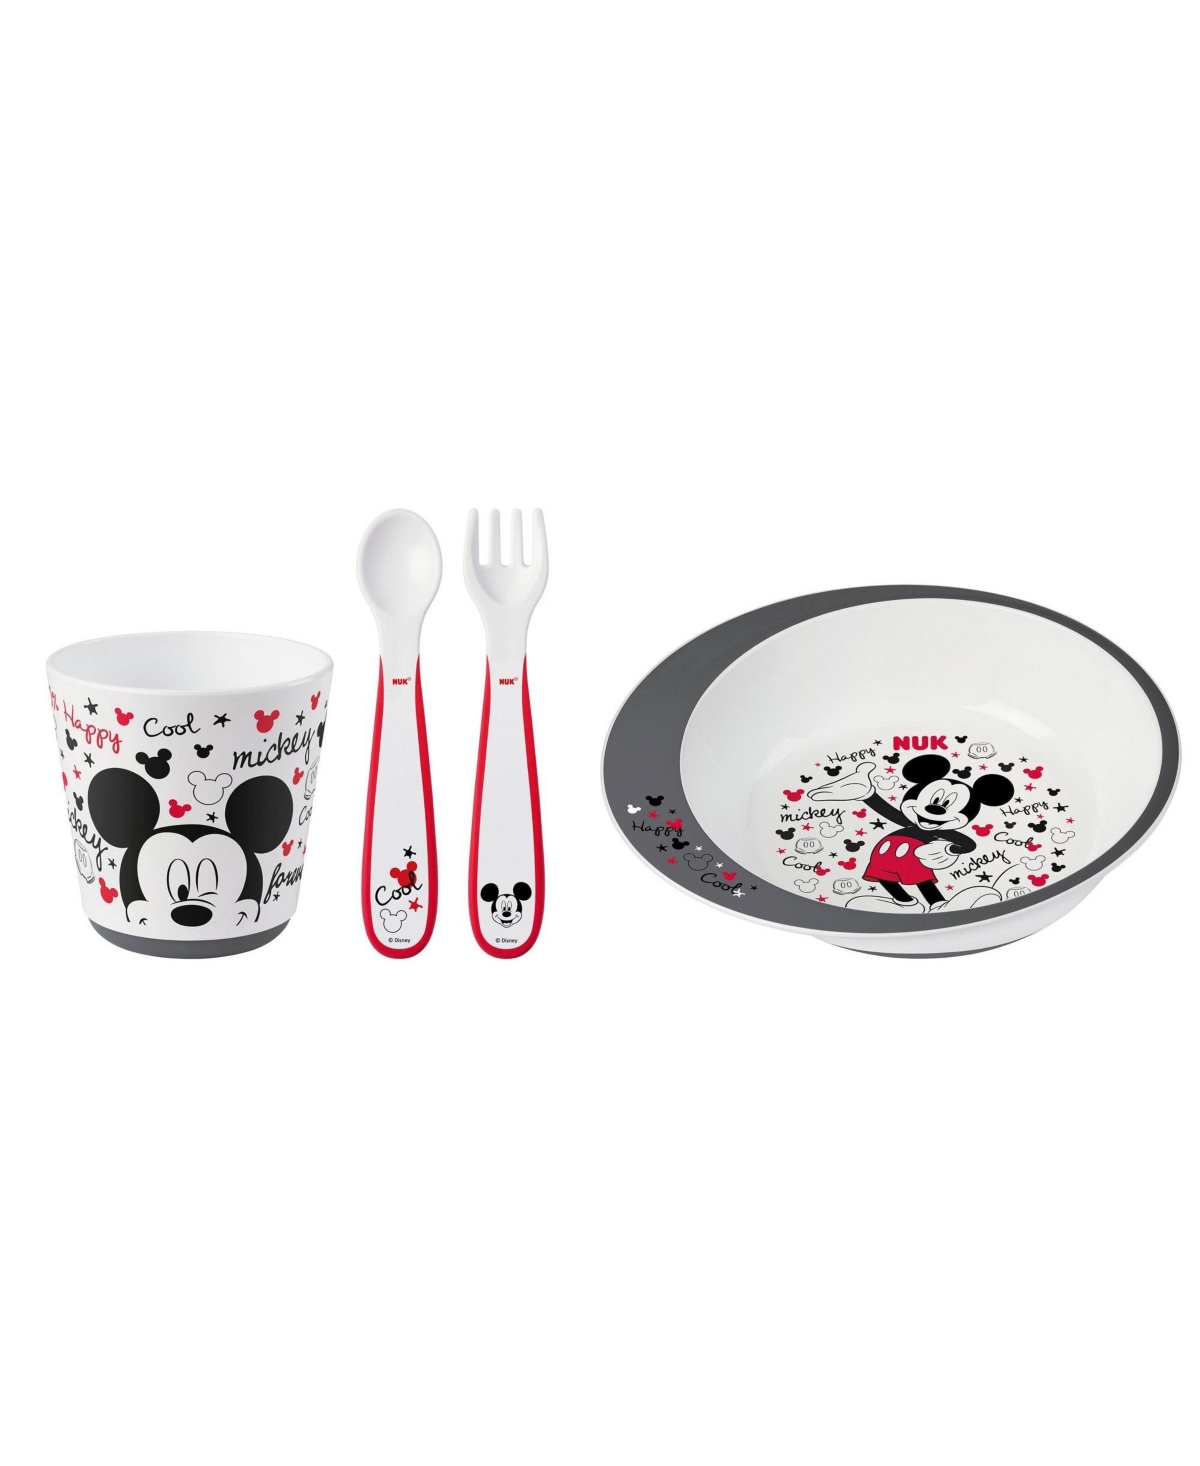 Nuk Mickey Mouse Child Toddler Tableware Set, 4 Pieces In Assorted Pre-pack